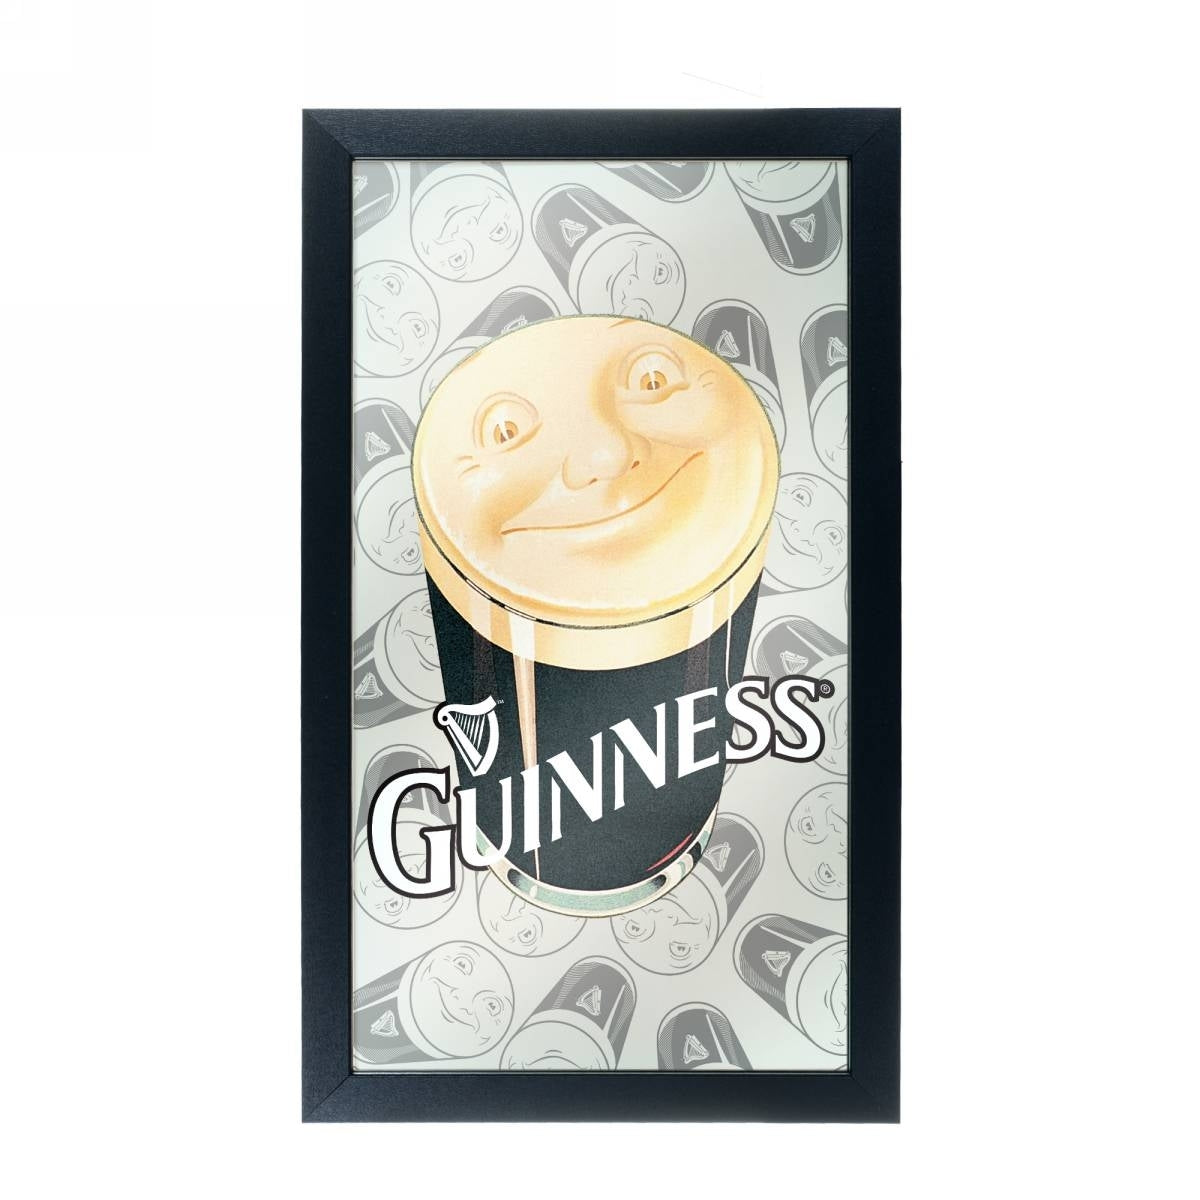 A Guinness Framed Mirror Wall Plaque 15 x 26 Inches - Smiling Pint with a smiley face on it, featuring a professional grade logo mirror.